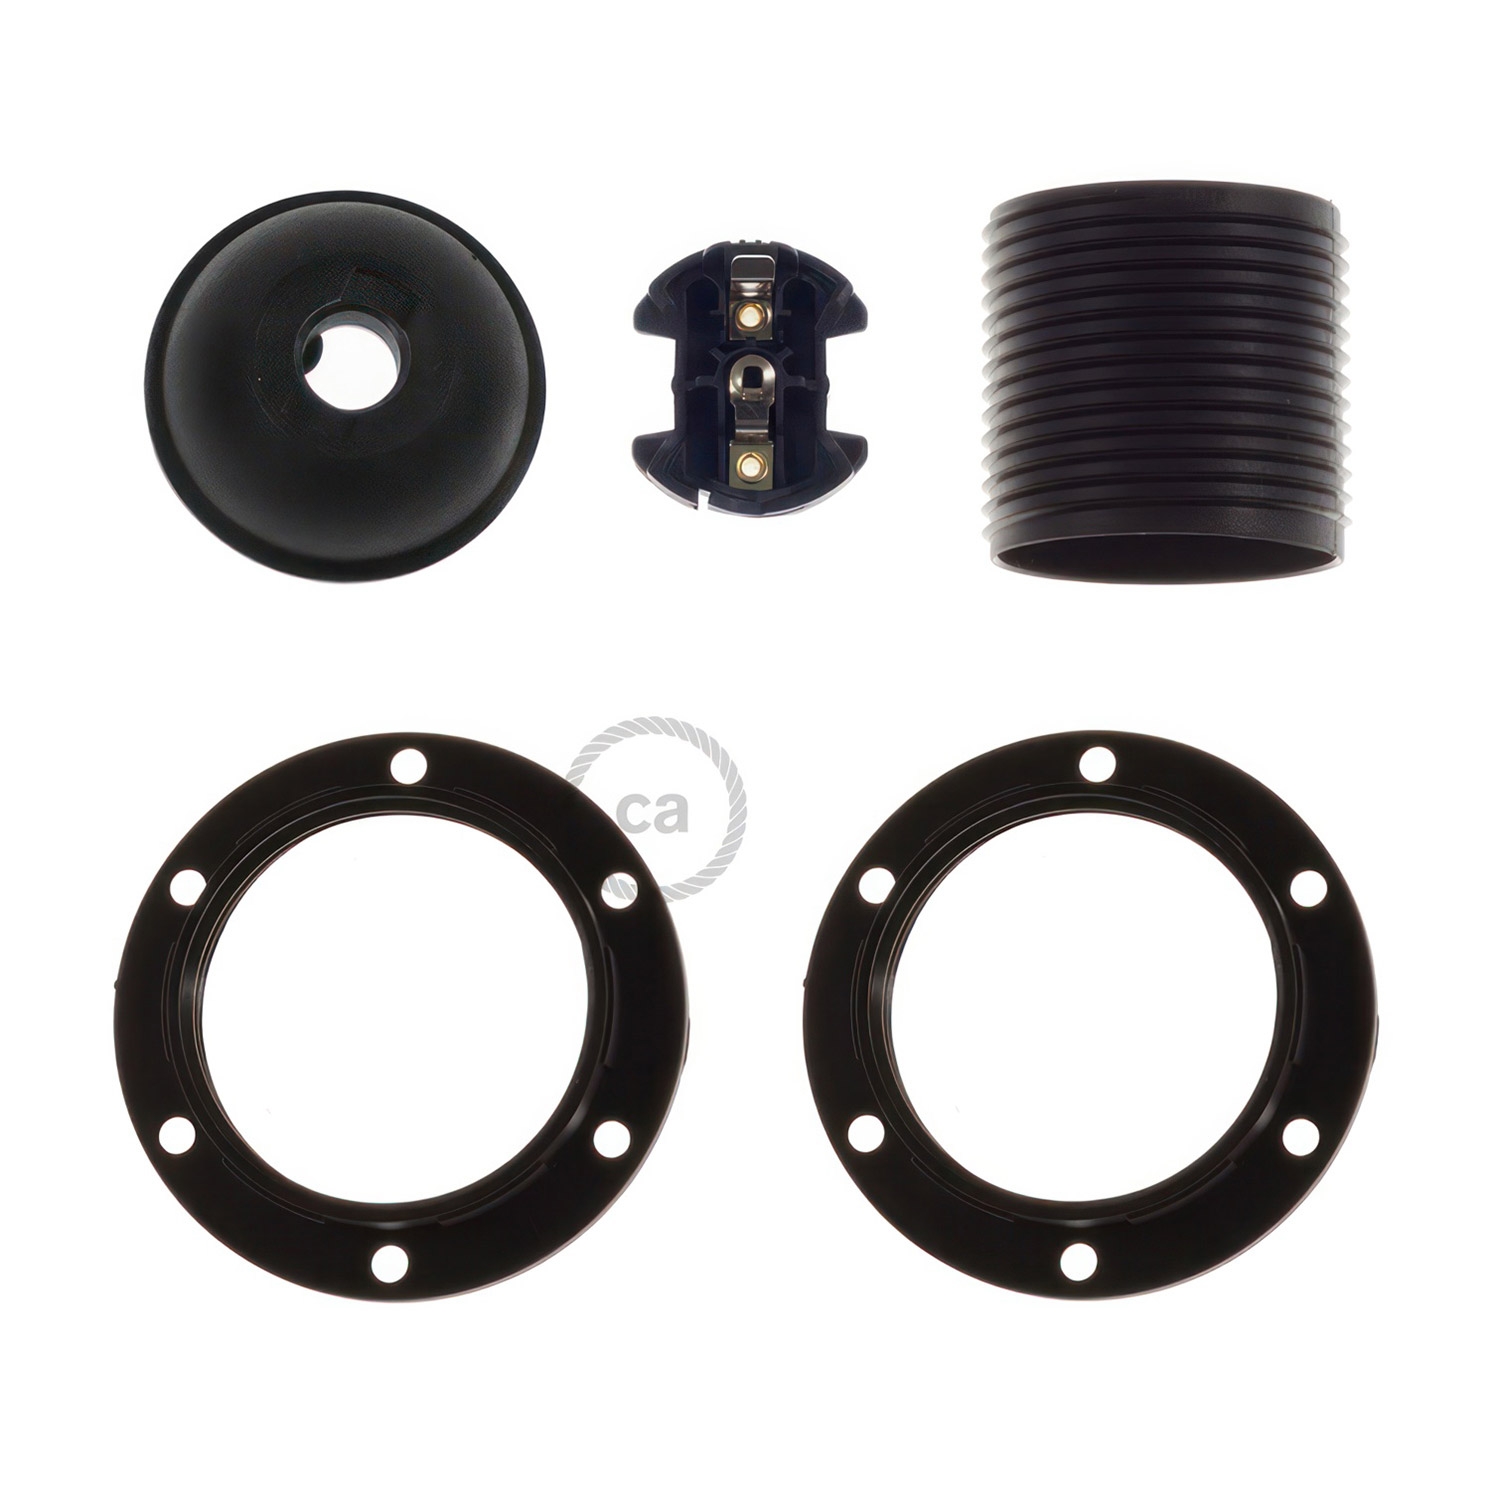 Thermoplastic E27 lamp holder kit for lampshade